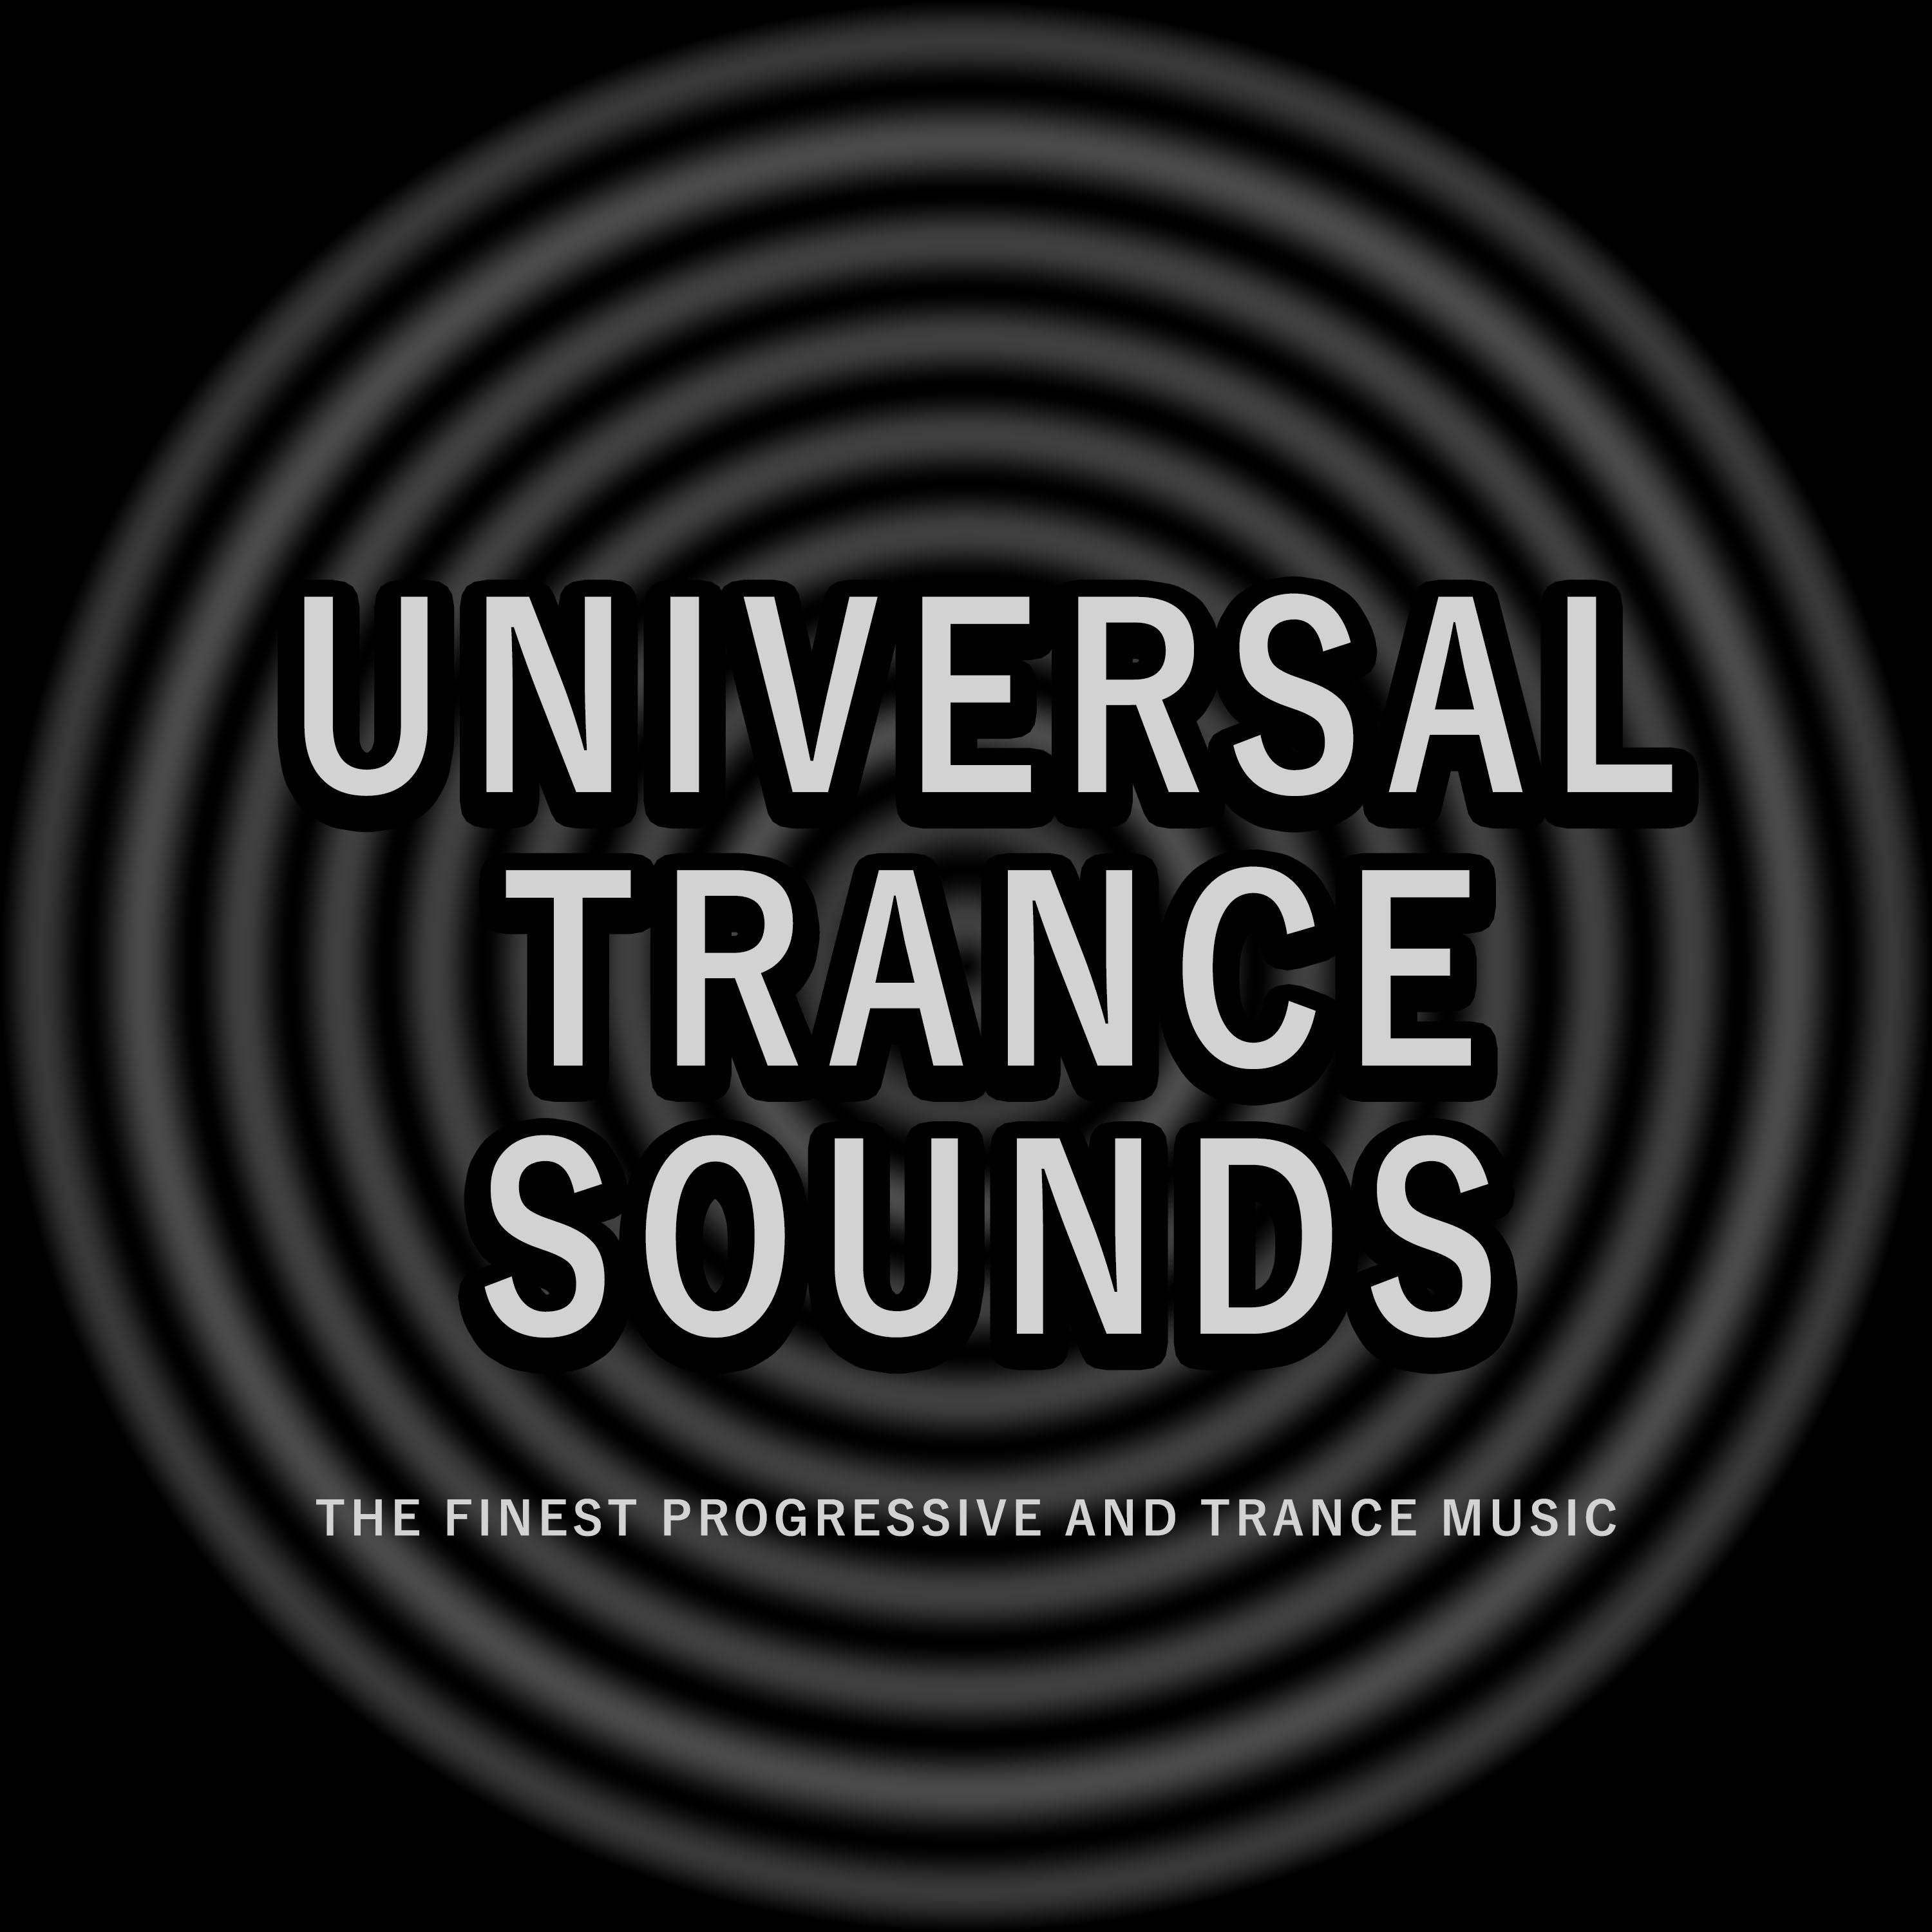 Universal Trance Sounds (The Finest Progressive and Trance Music)